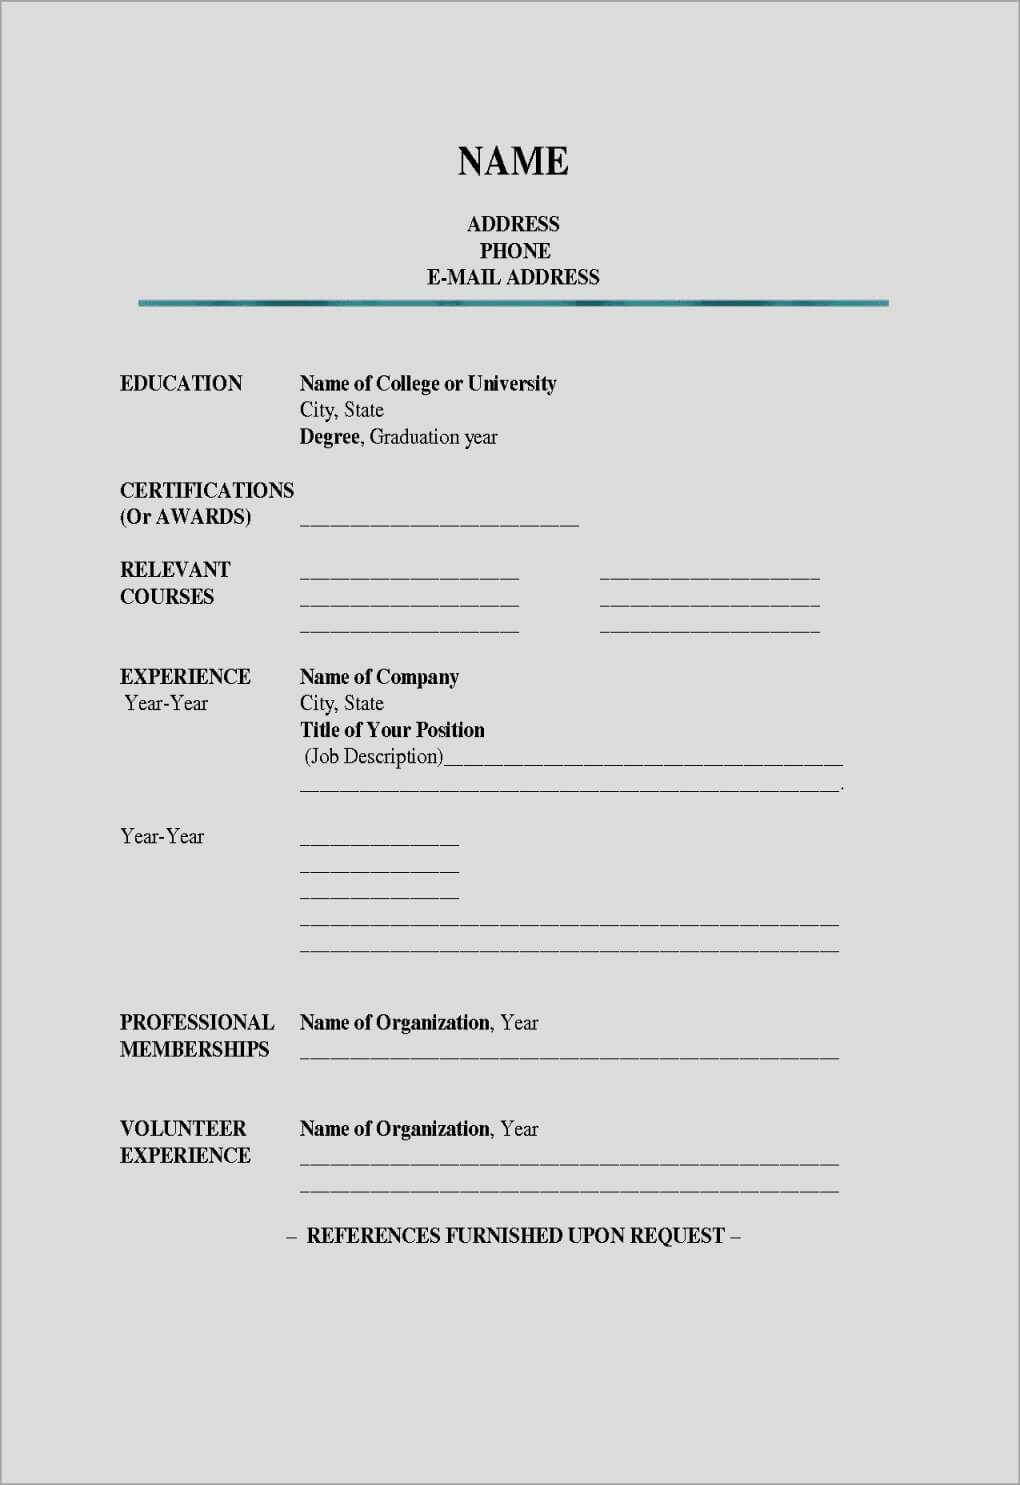 Resume Template To Fill In Fill In Resume Inspirational Fill With Free Bio Template Fill In Blank